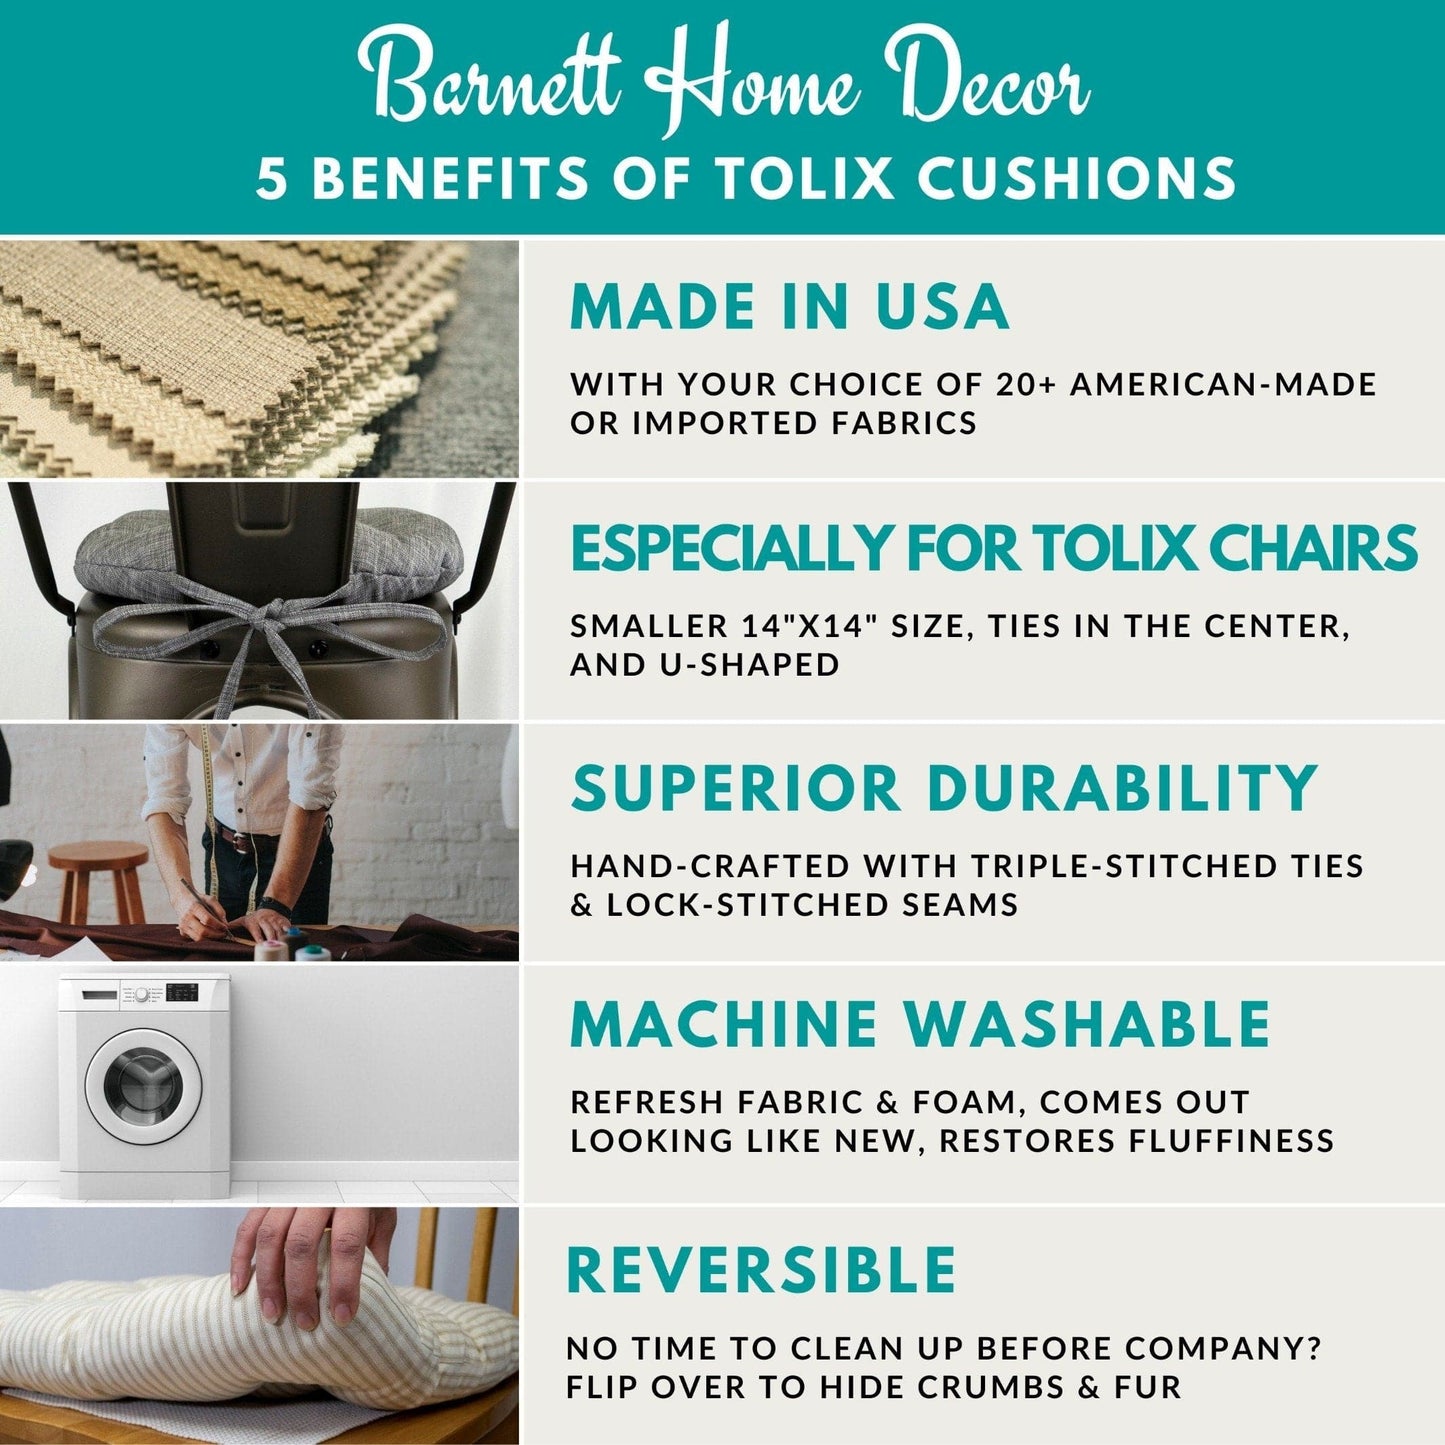 Barnett Home Decor 5 Benefits of Tolix Cushions, Made in USA, Made for Tolix Chairs, Superior Durability, Machine Washable, Reversible 